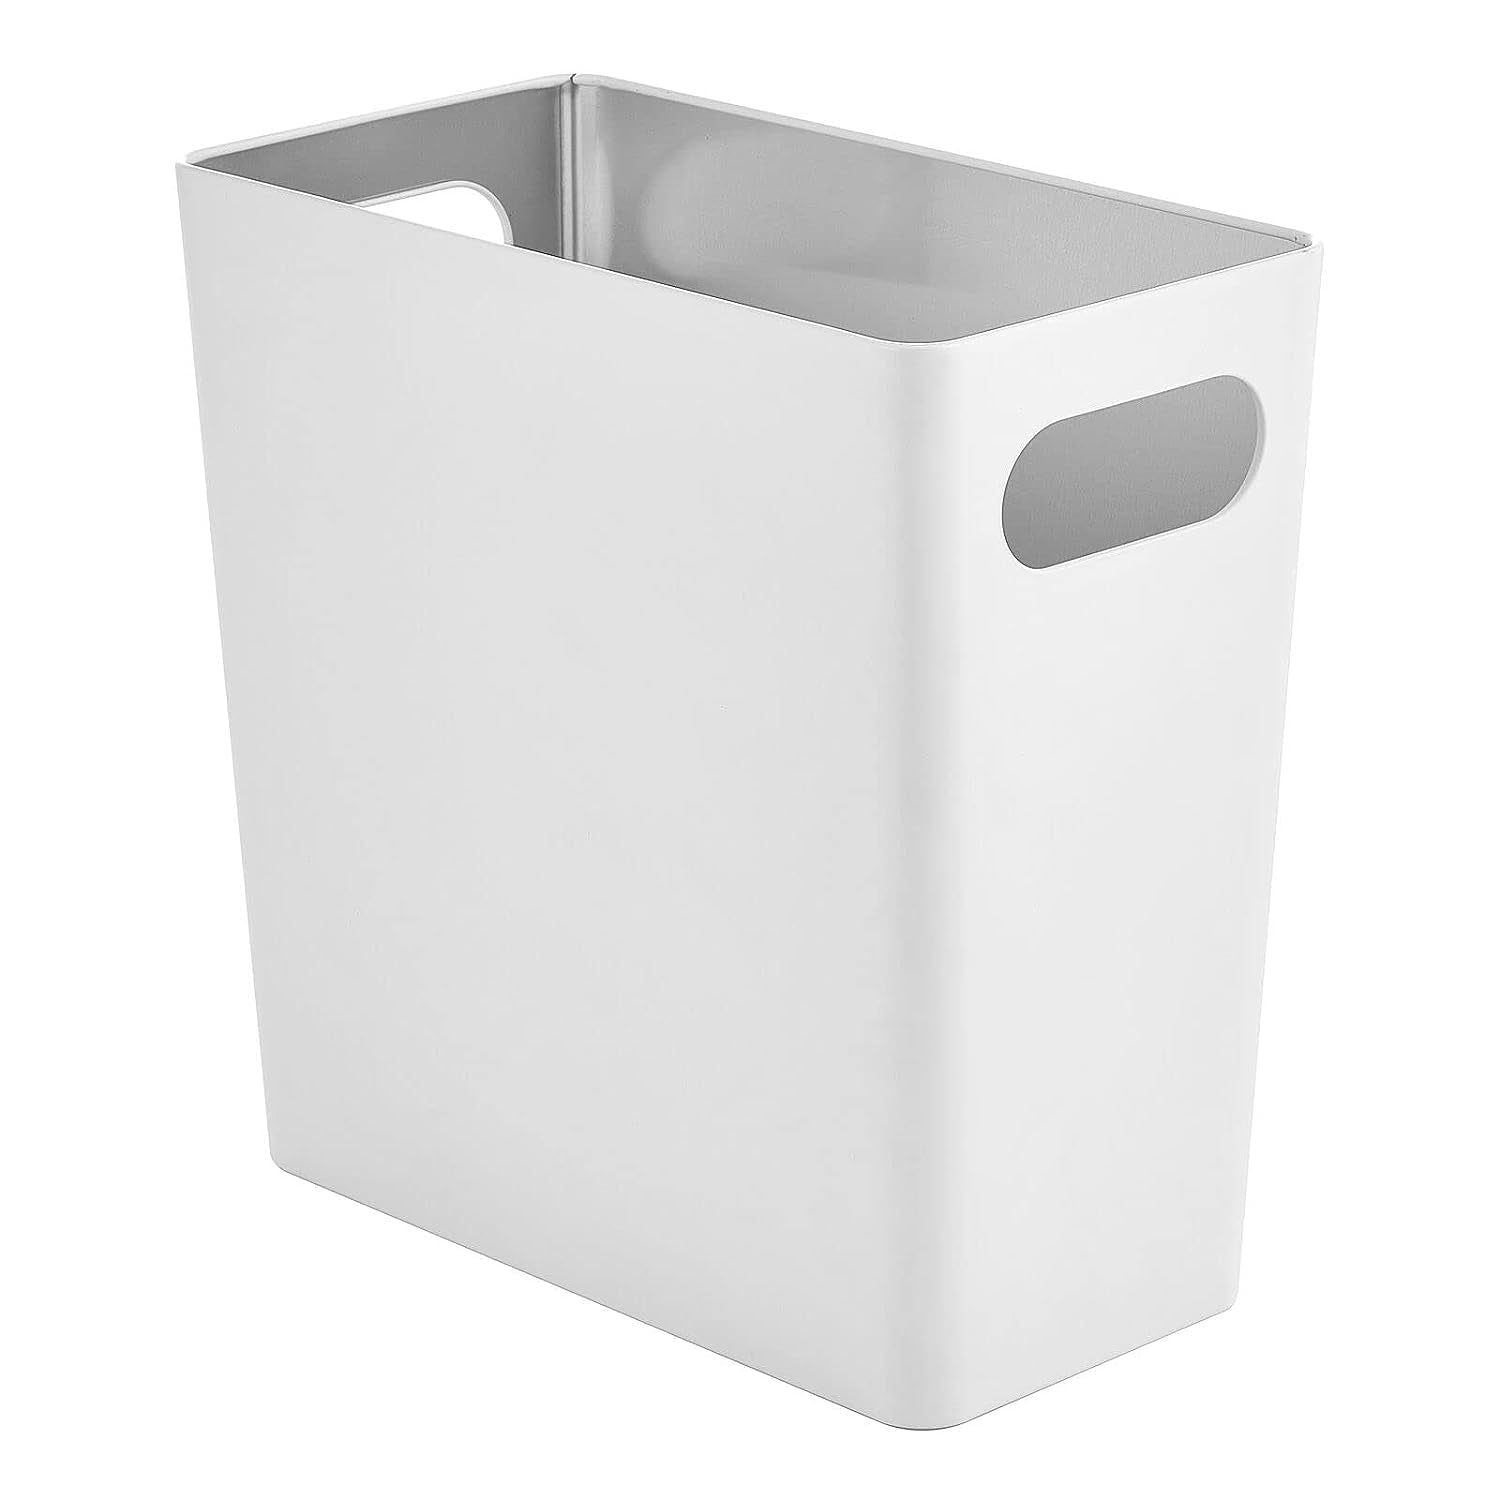 mDesign Plastic Small Trash Can, 1.5 Gallon/5.7-Liter Wastebasket, Narrow  Garbage Bin with Handles for Bathroom, Laundry, Home Office - Holds Waste